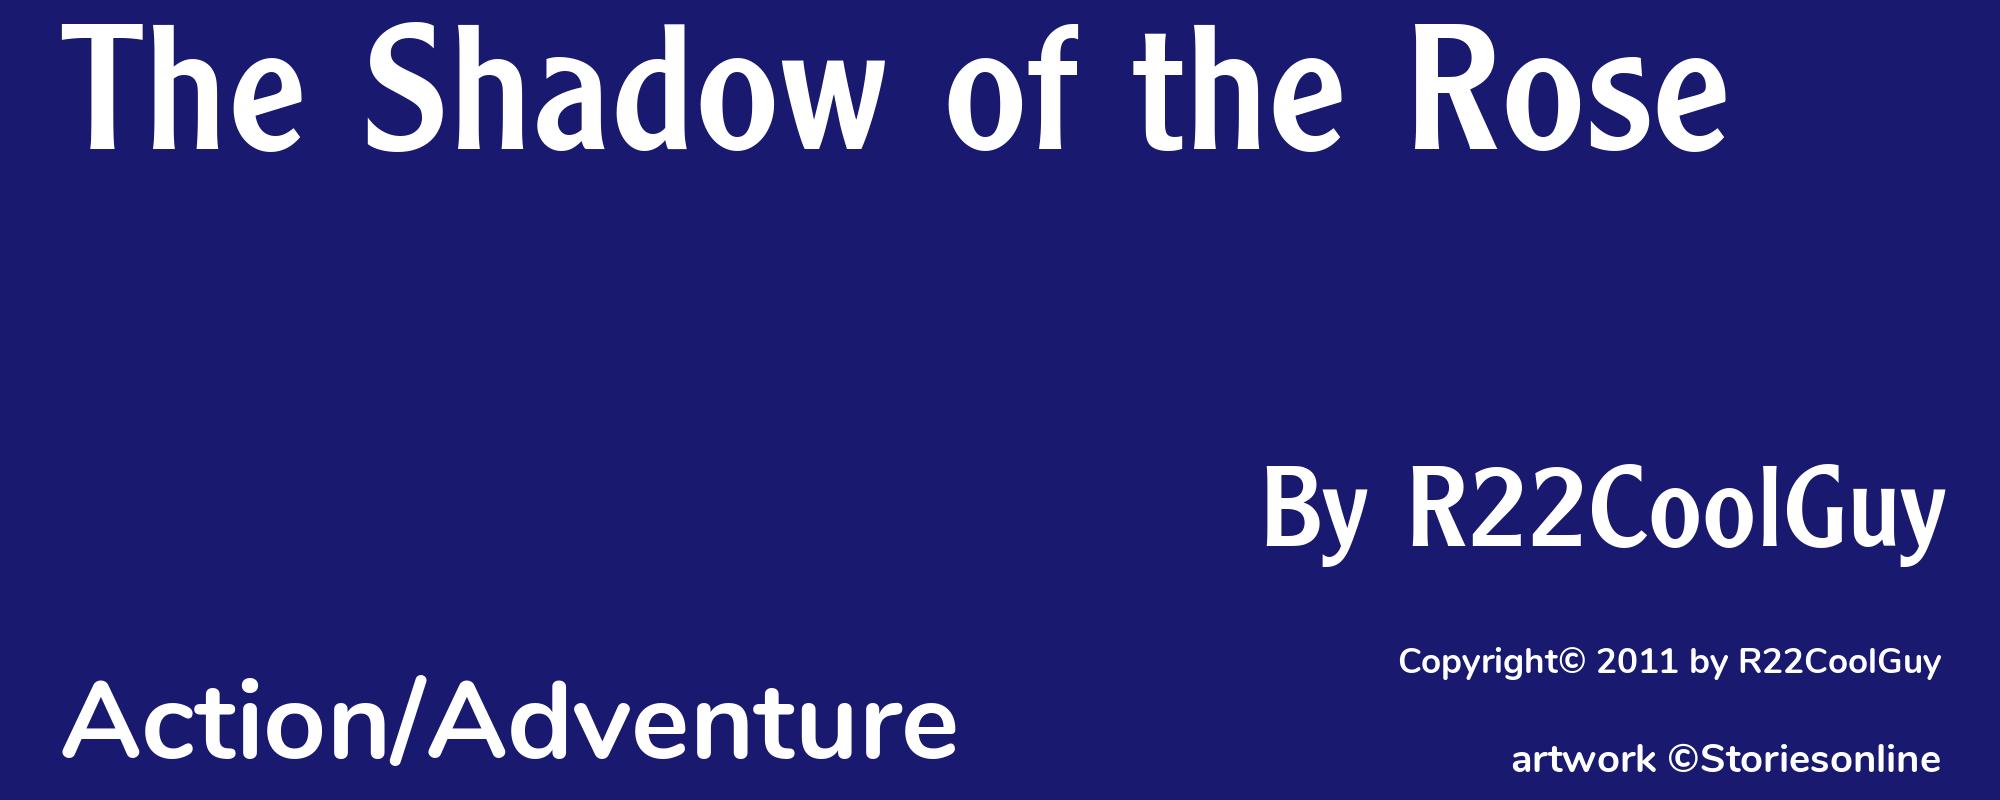 The Shadow of the Rose - Cover